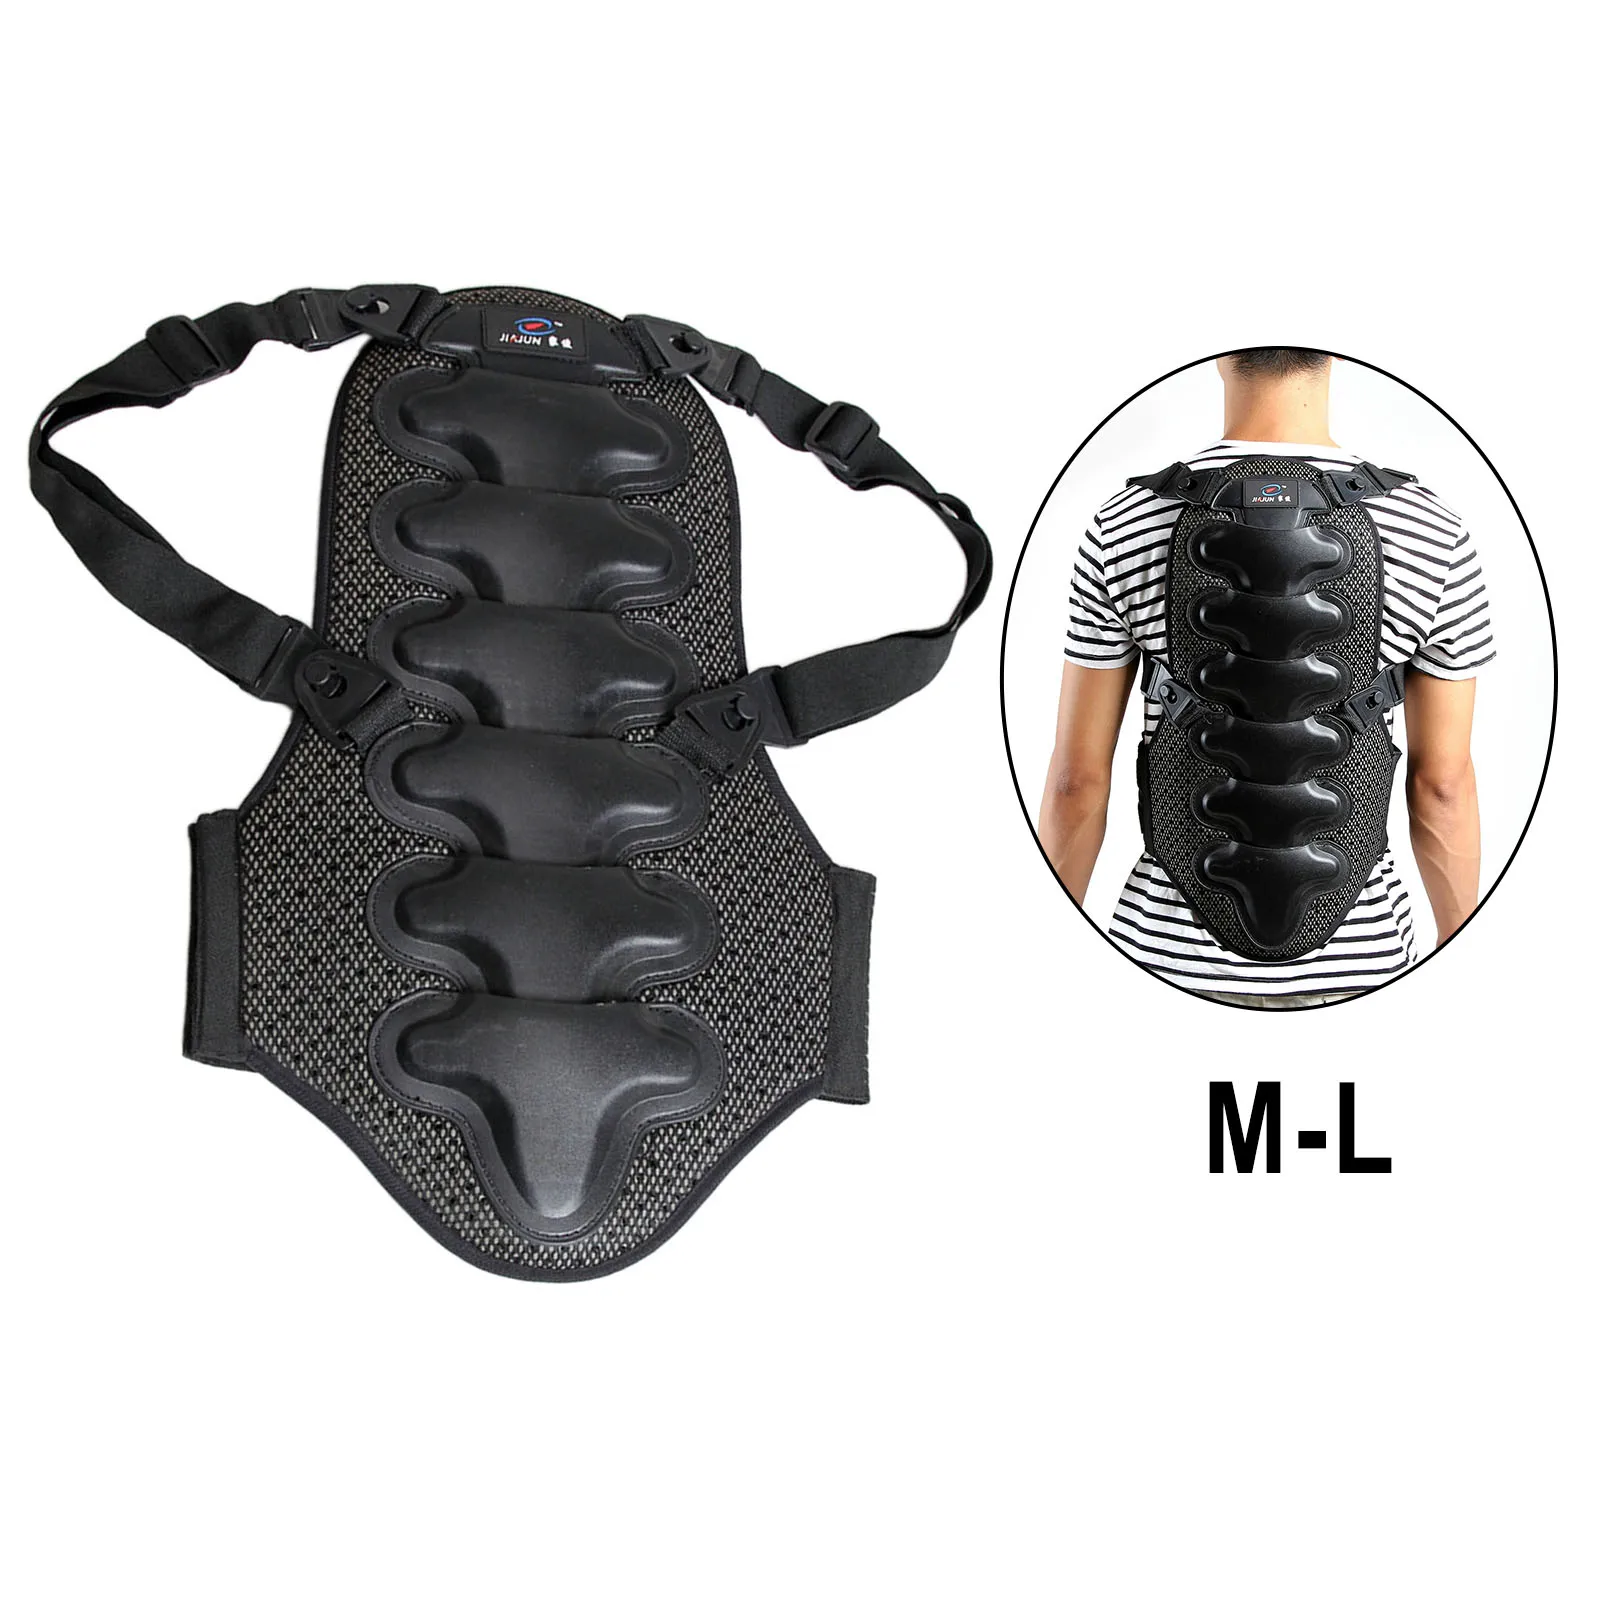 Motorcycle Back Protector Black Protective Adjustable Gear Vest Fit for Cycling Skiing Racing Riding Passenger Driver